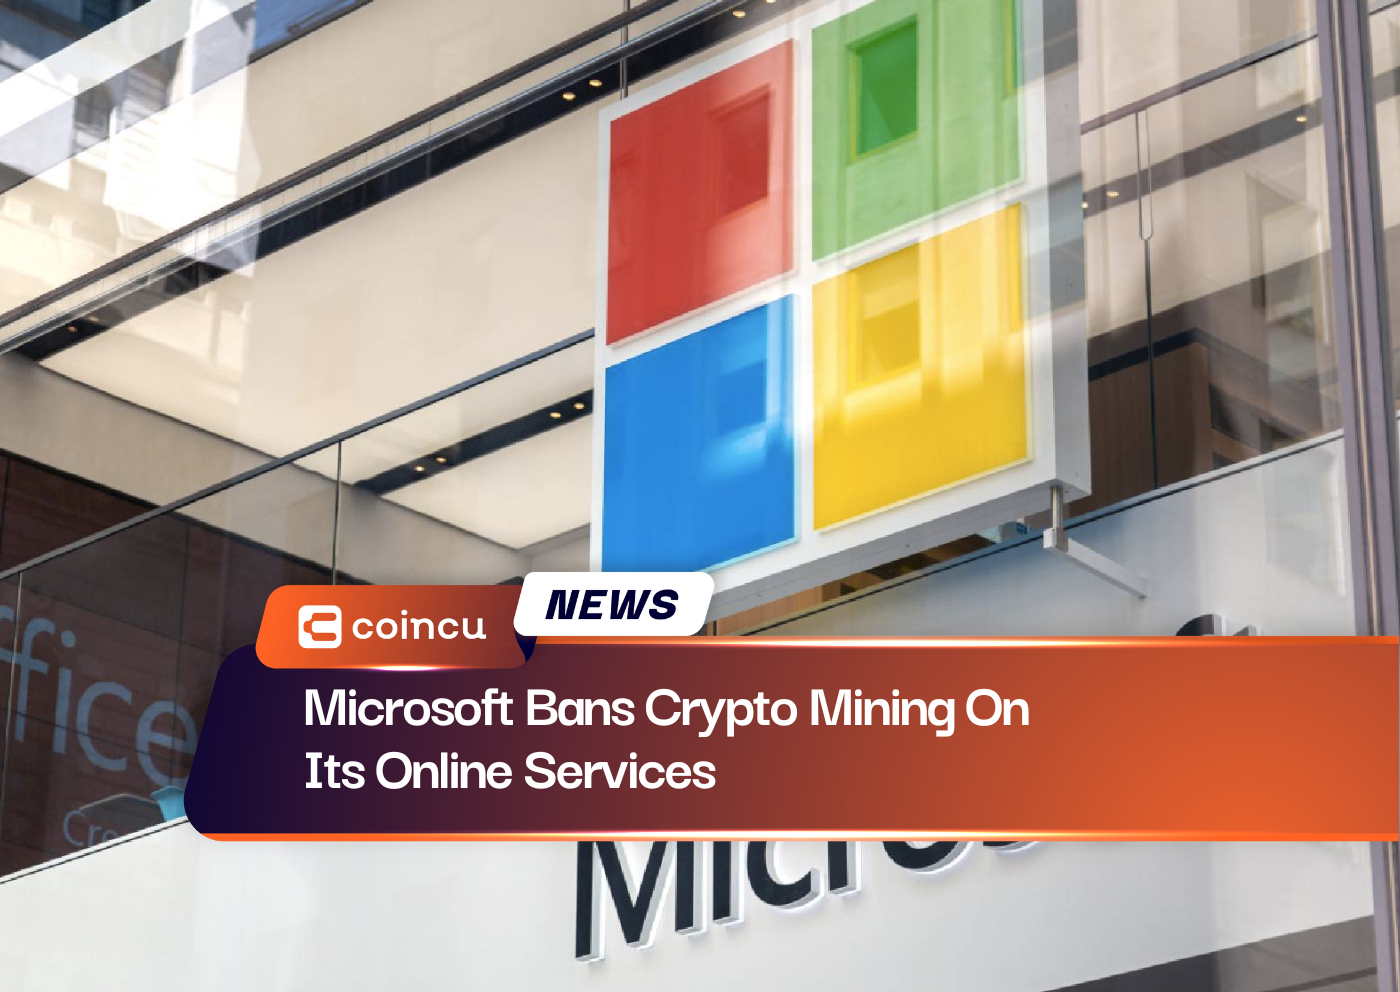 Microsoft Bans Crypto Mining On Its Online Services